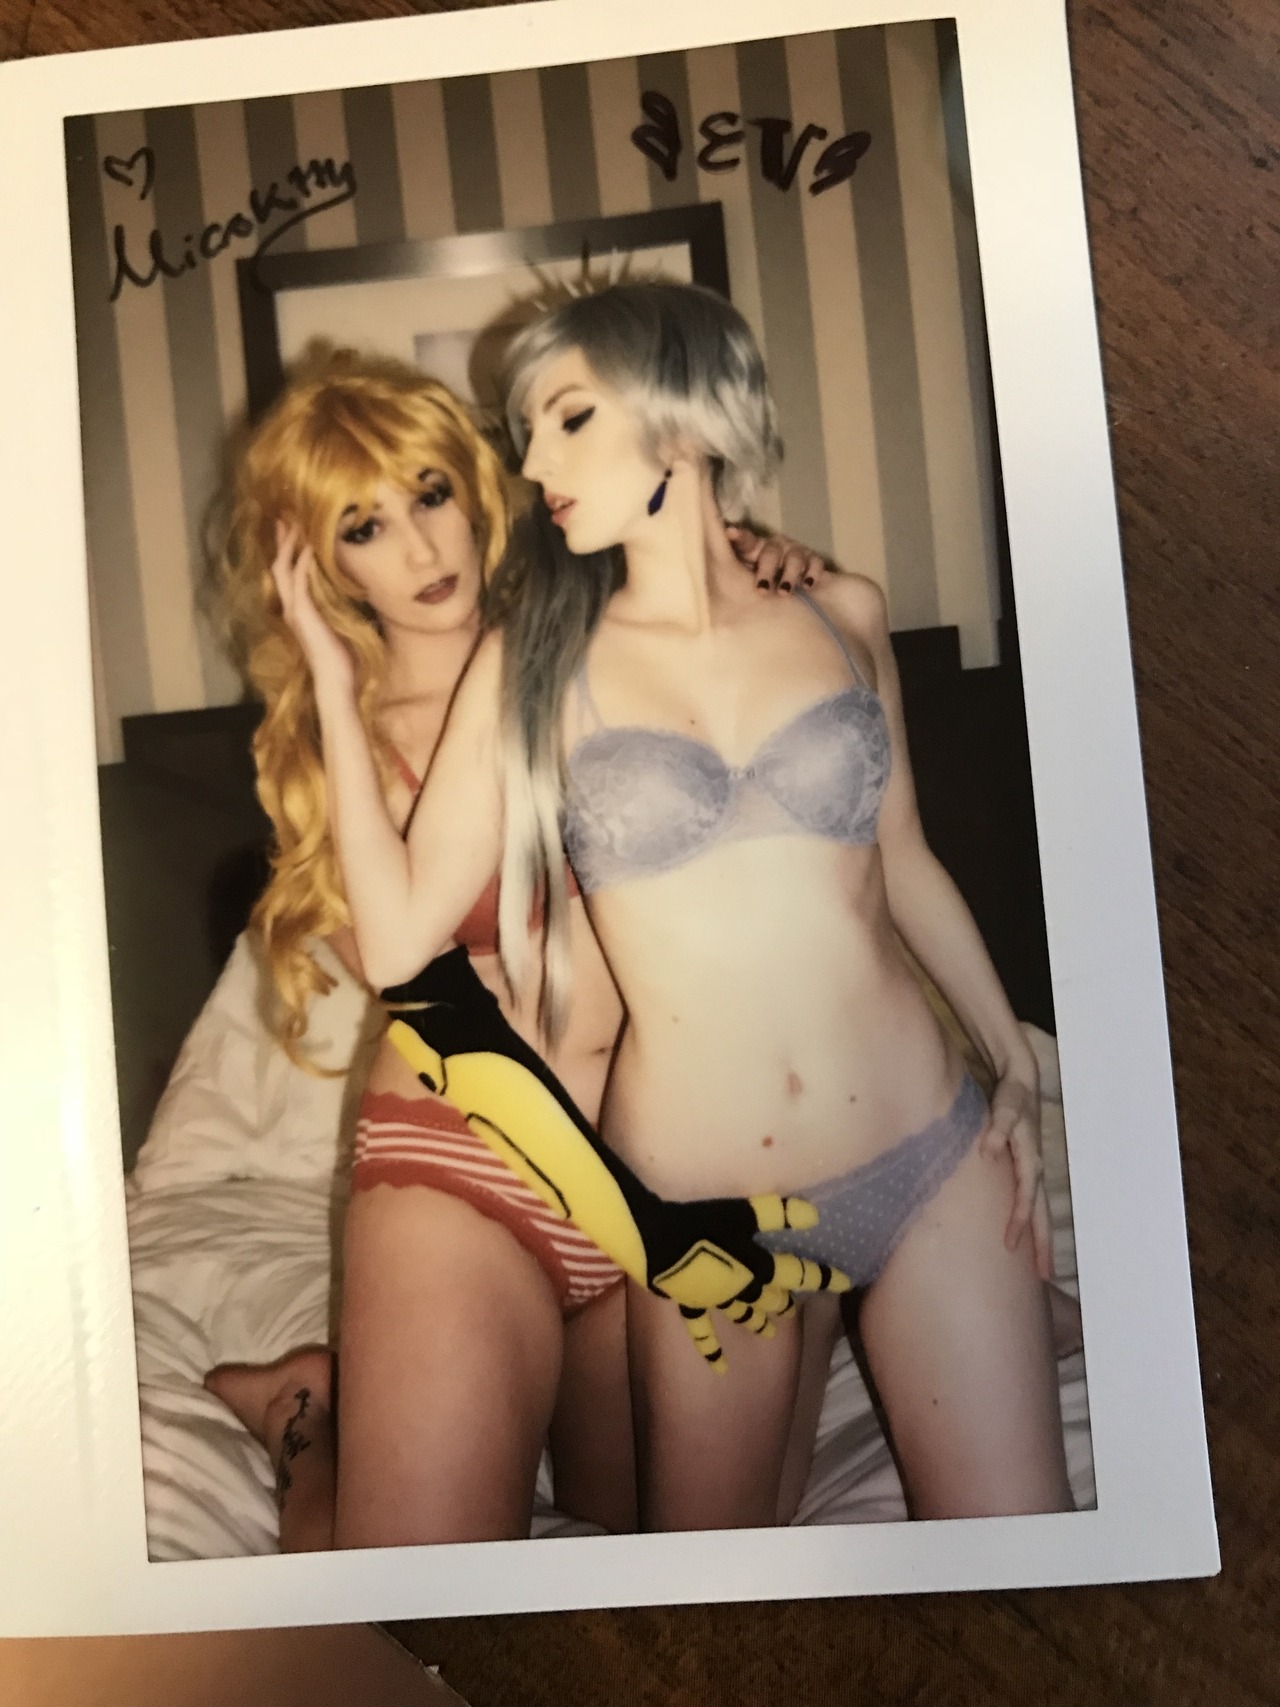 added tons of polaroids to my store :https://microkitty.storenvy.com/collections/1369247-polaroidsthere